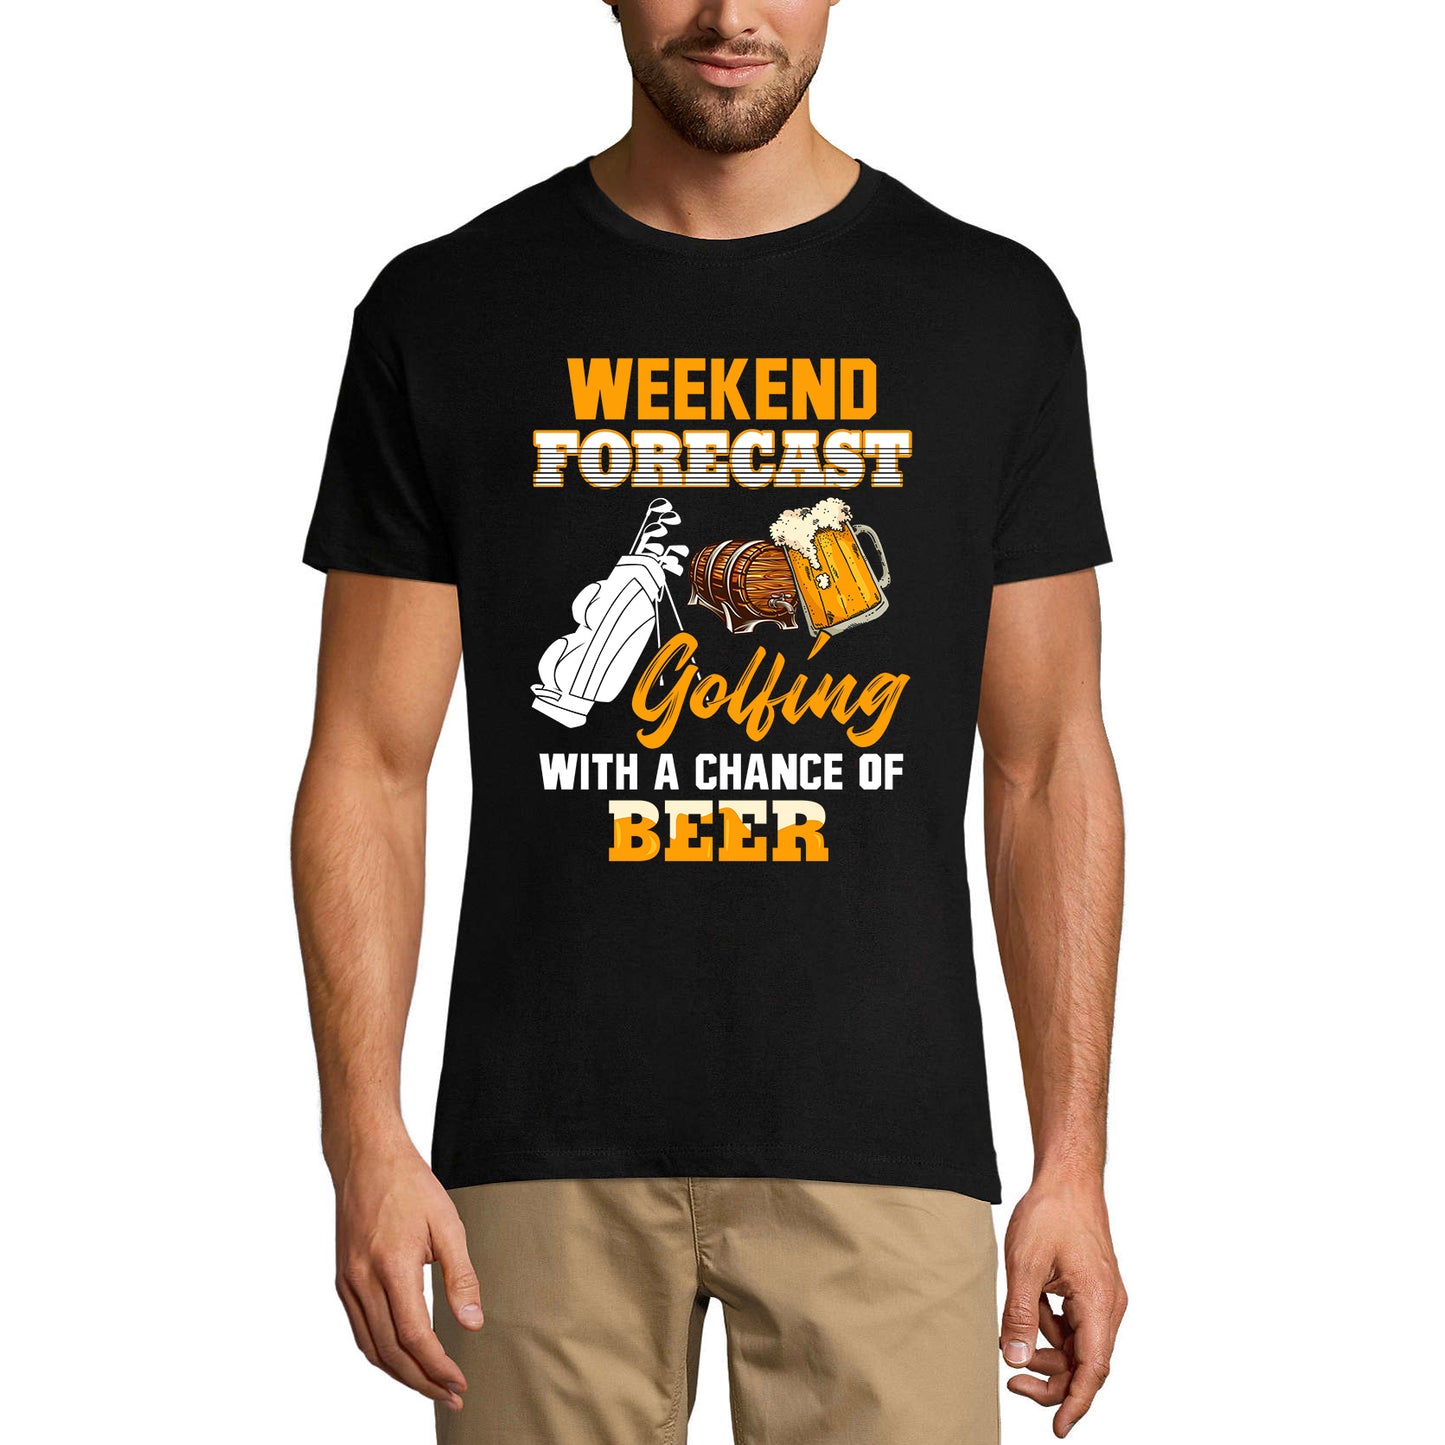 ULTRABASIC Herren T-Shirt Weekend Forecast Golfing With a Chance of Beer – Trinkliebhaber-T-Shirt